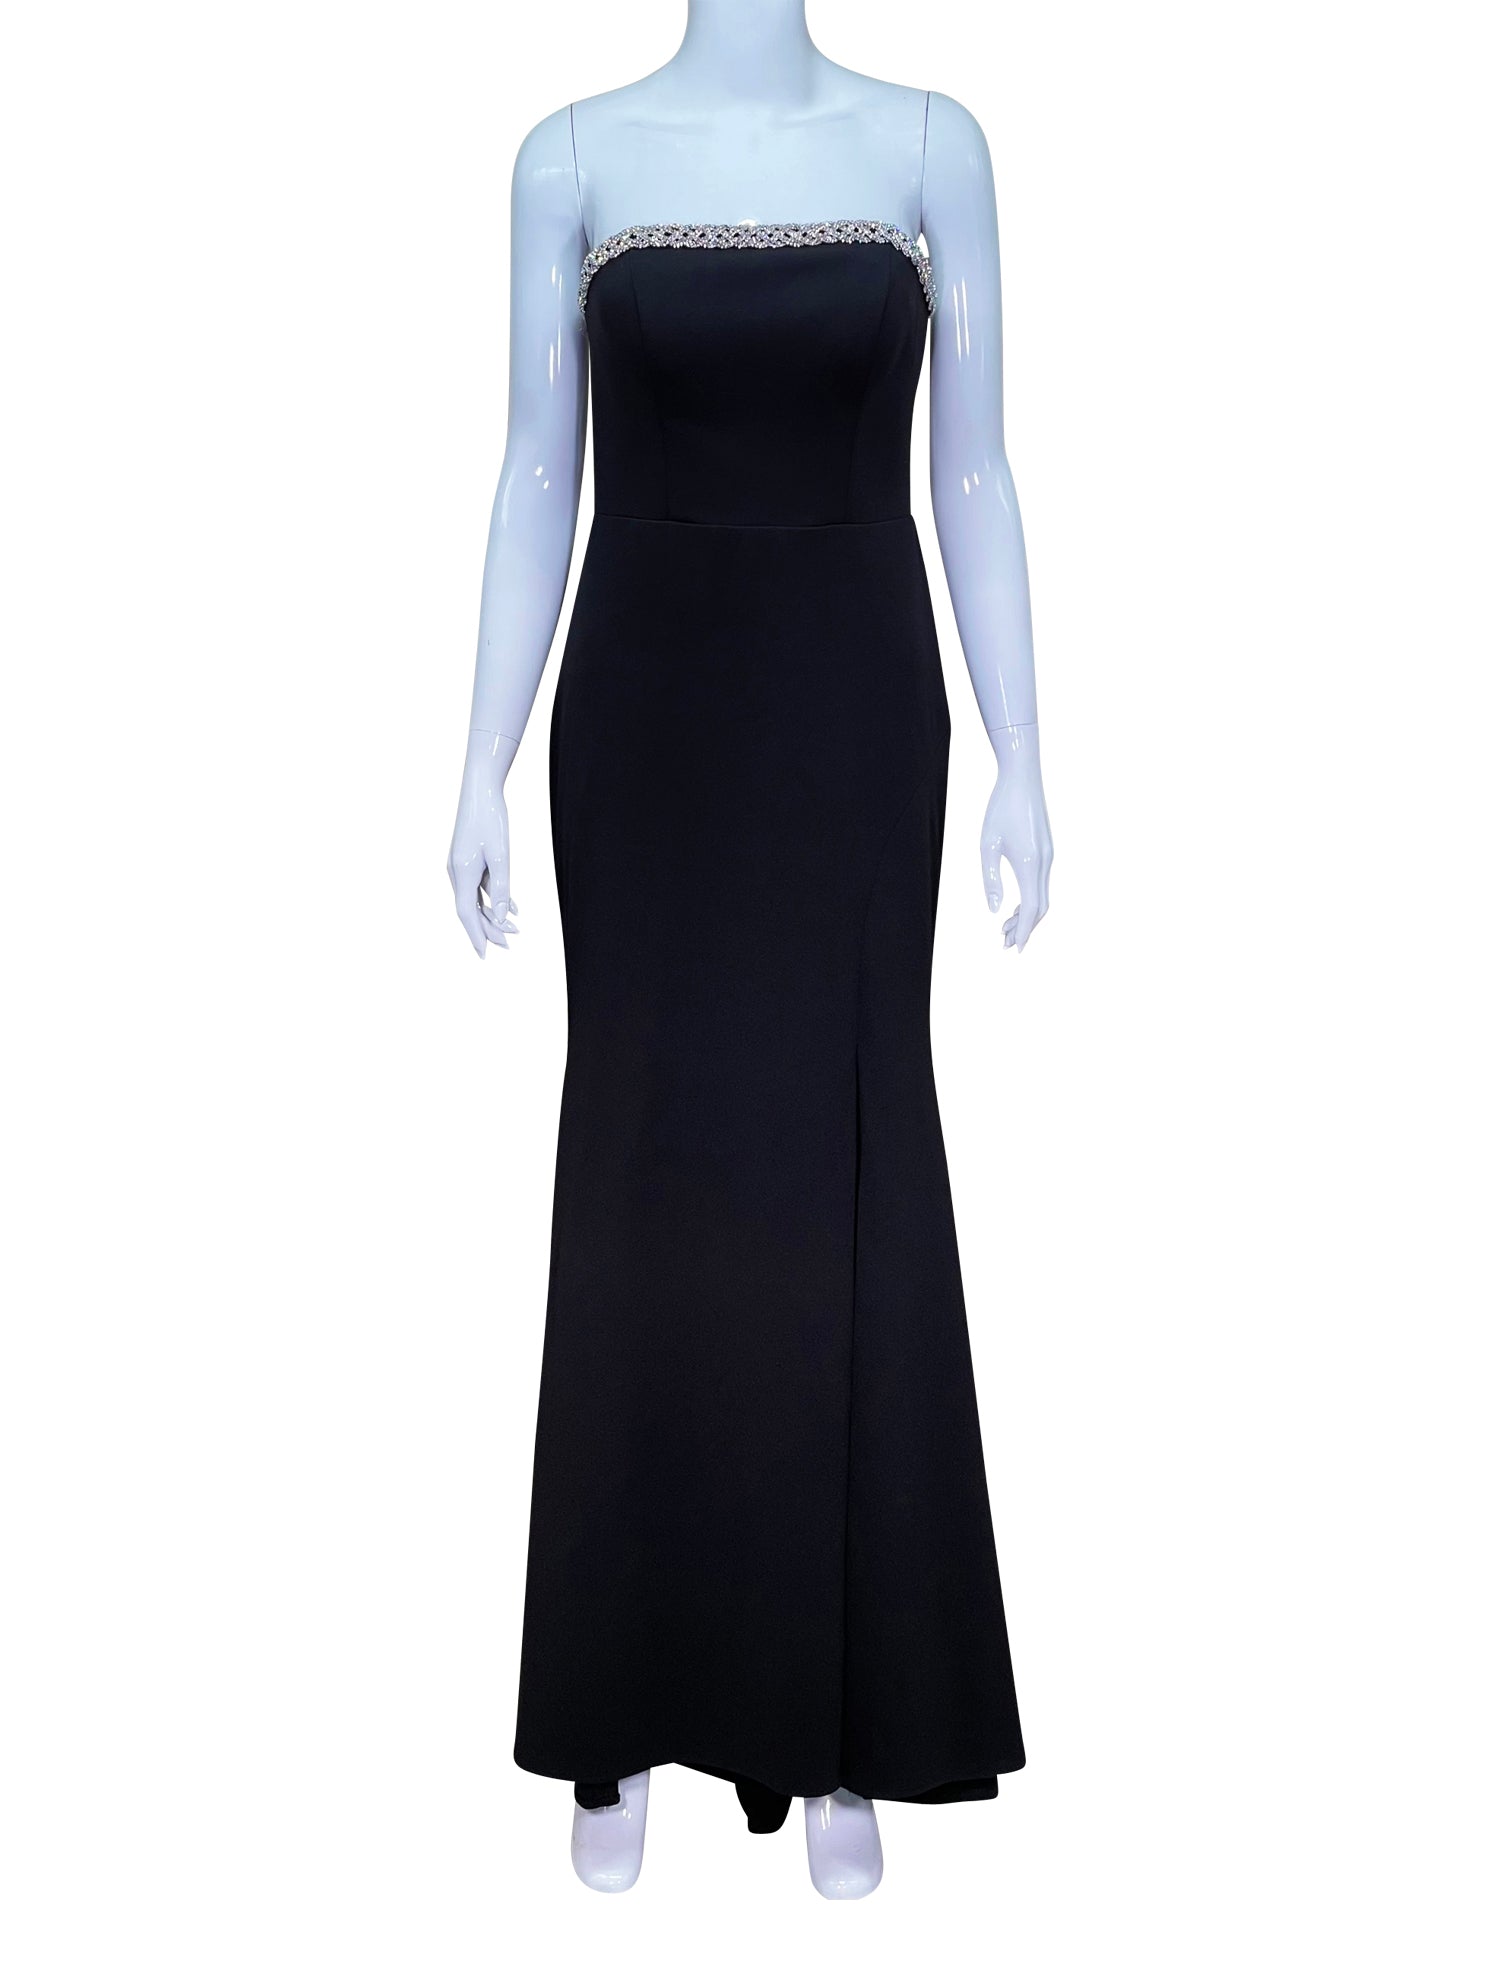 Aqua Strapless Embellished Evening Gown